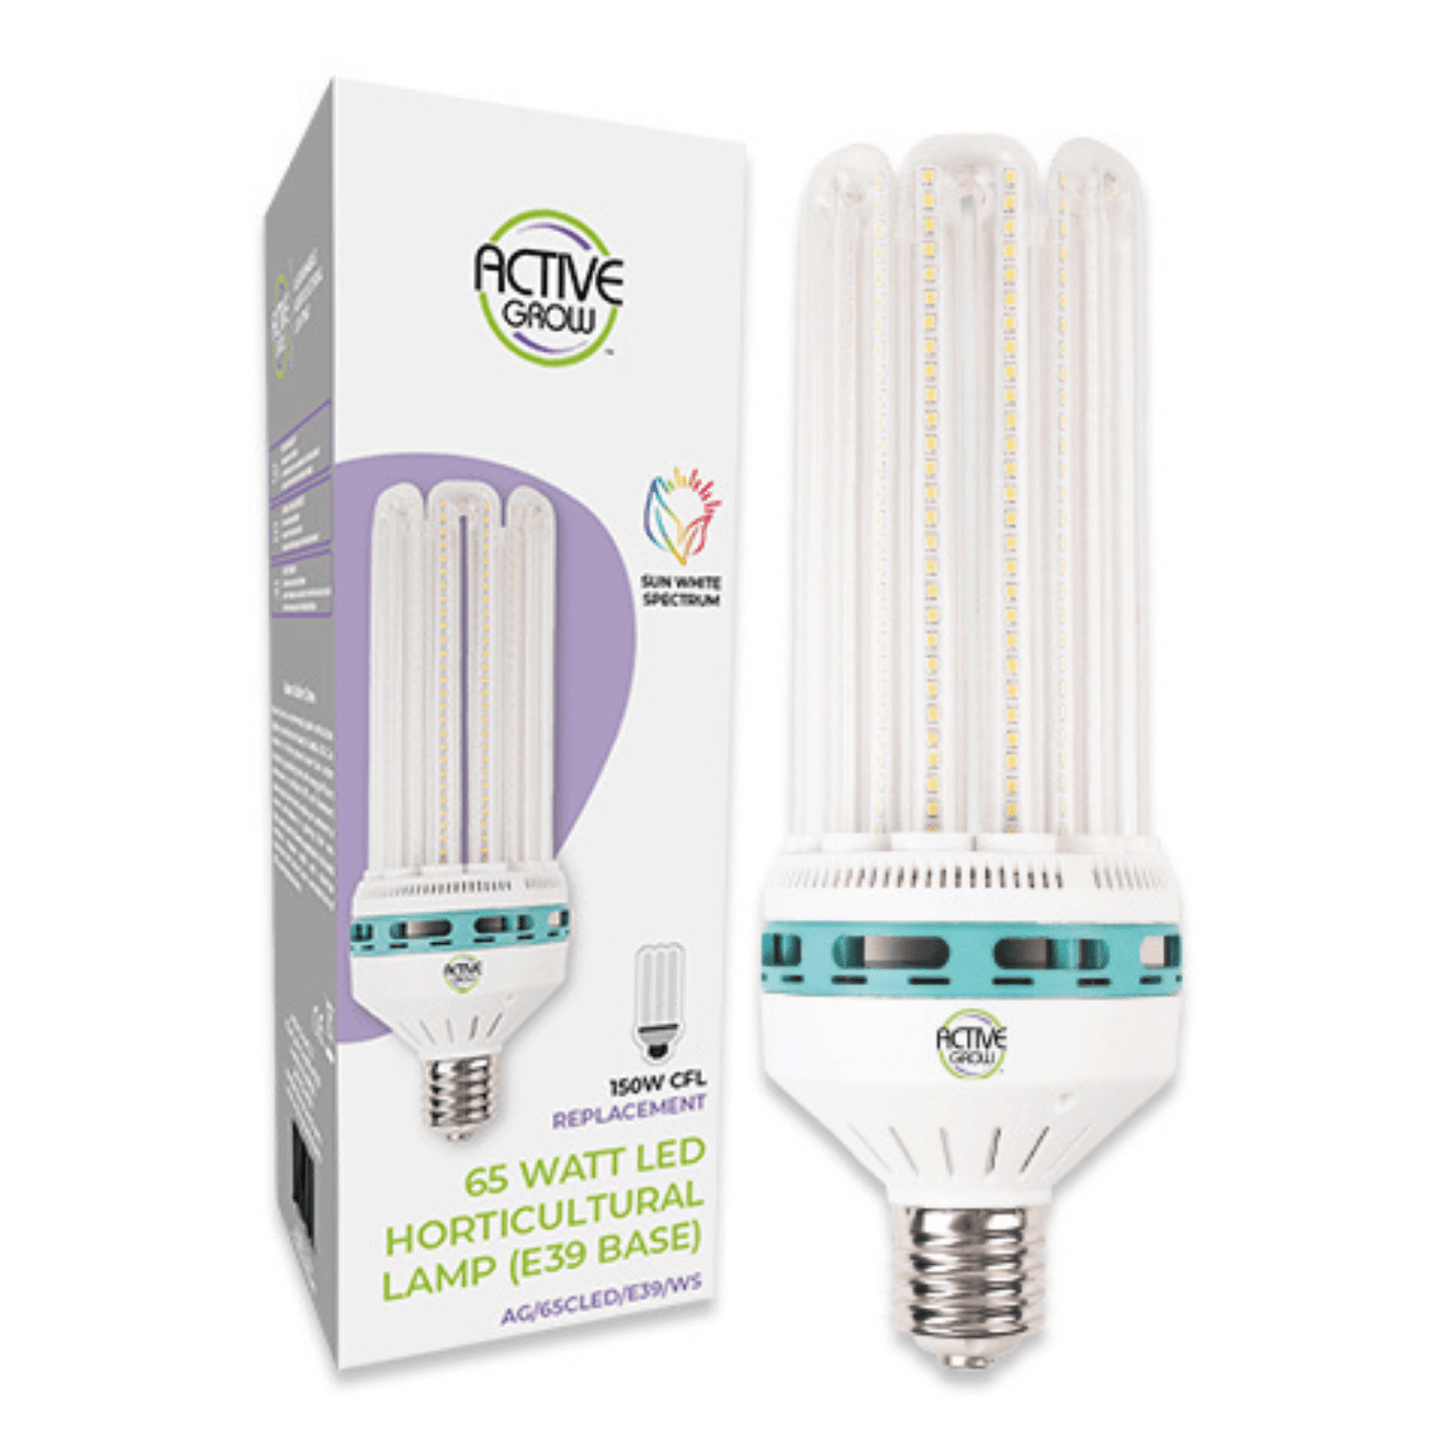 Active Grow 65W E39 Base Horticultural Lamp - Sun White Spectrum AG/65CLED/E39/WS Grow Lights 752505498706